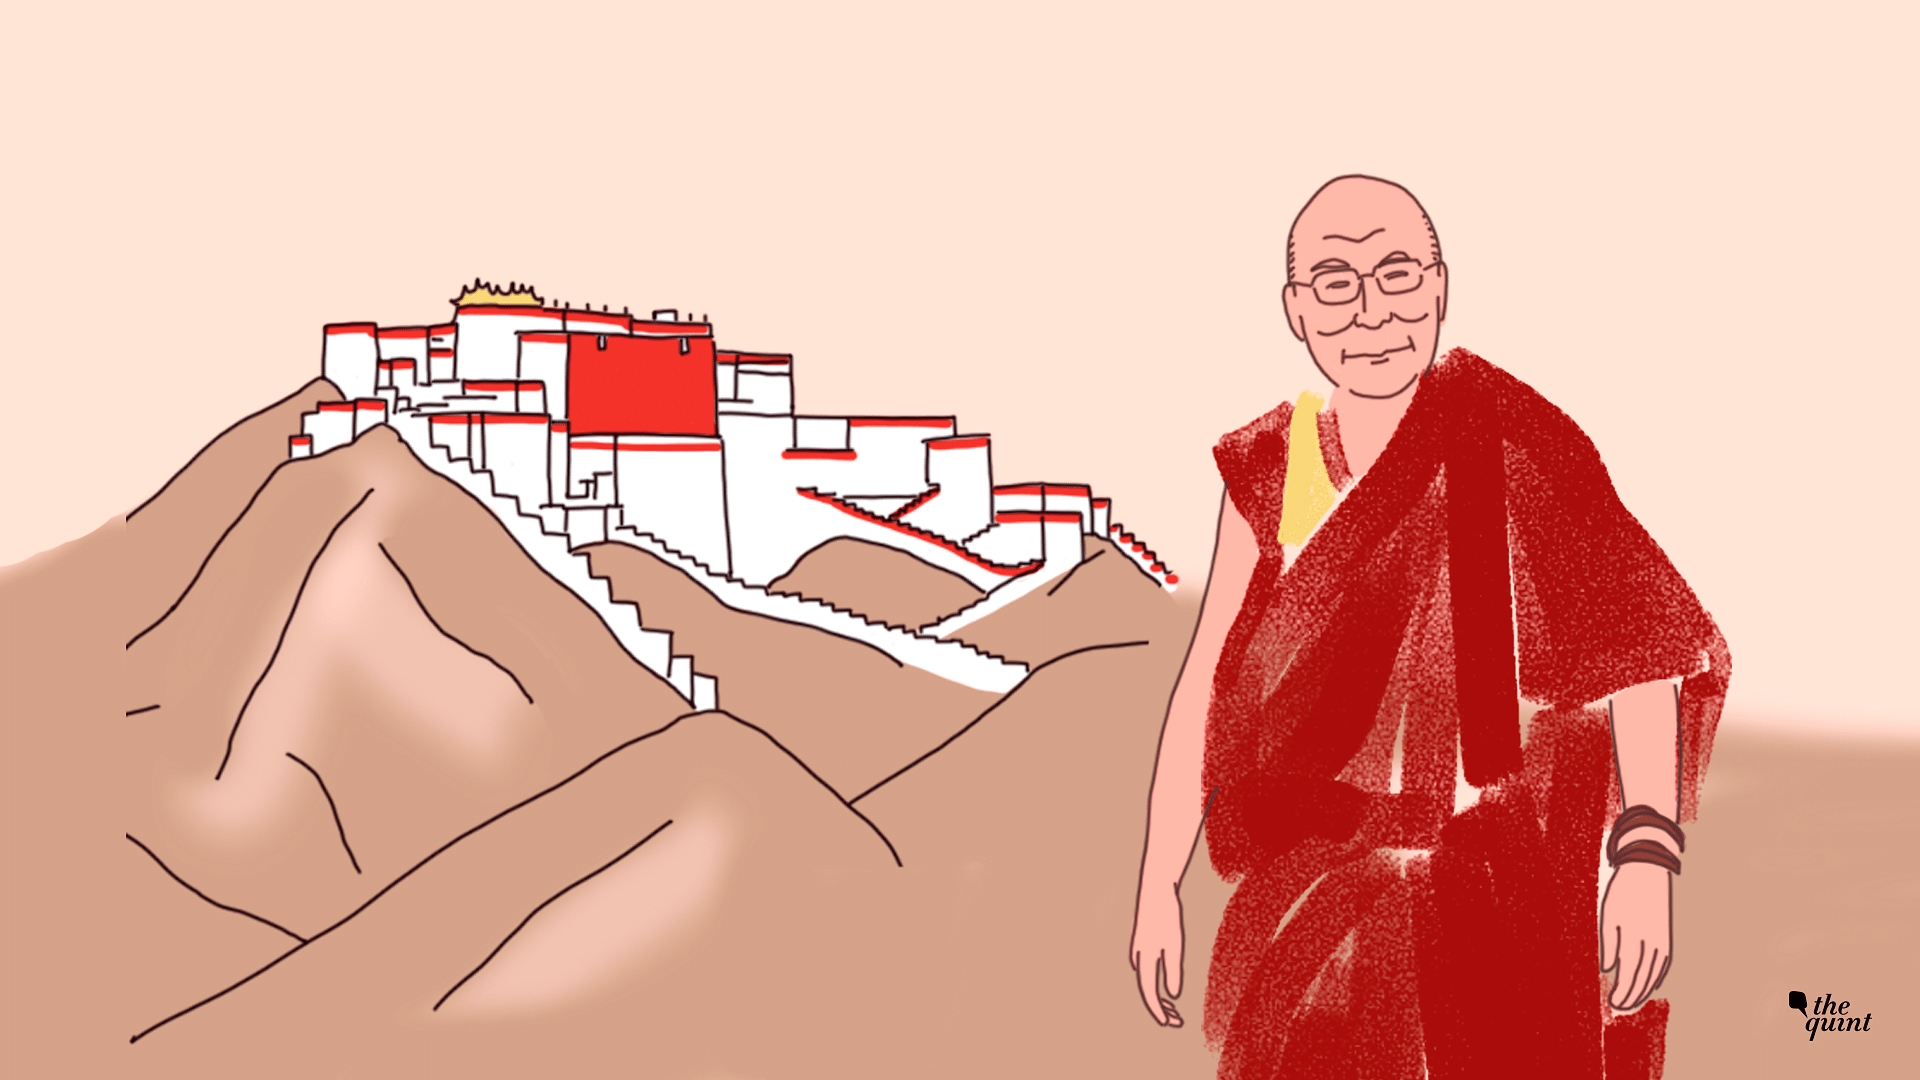 The 14th Dalai Lama’s escape to India is a harrowing tale. Read on to find out how it happened. 